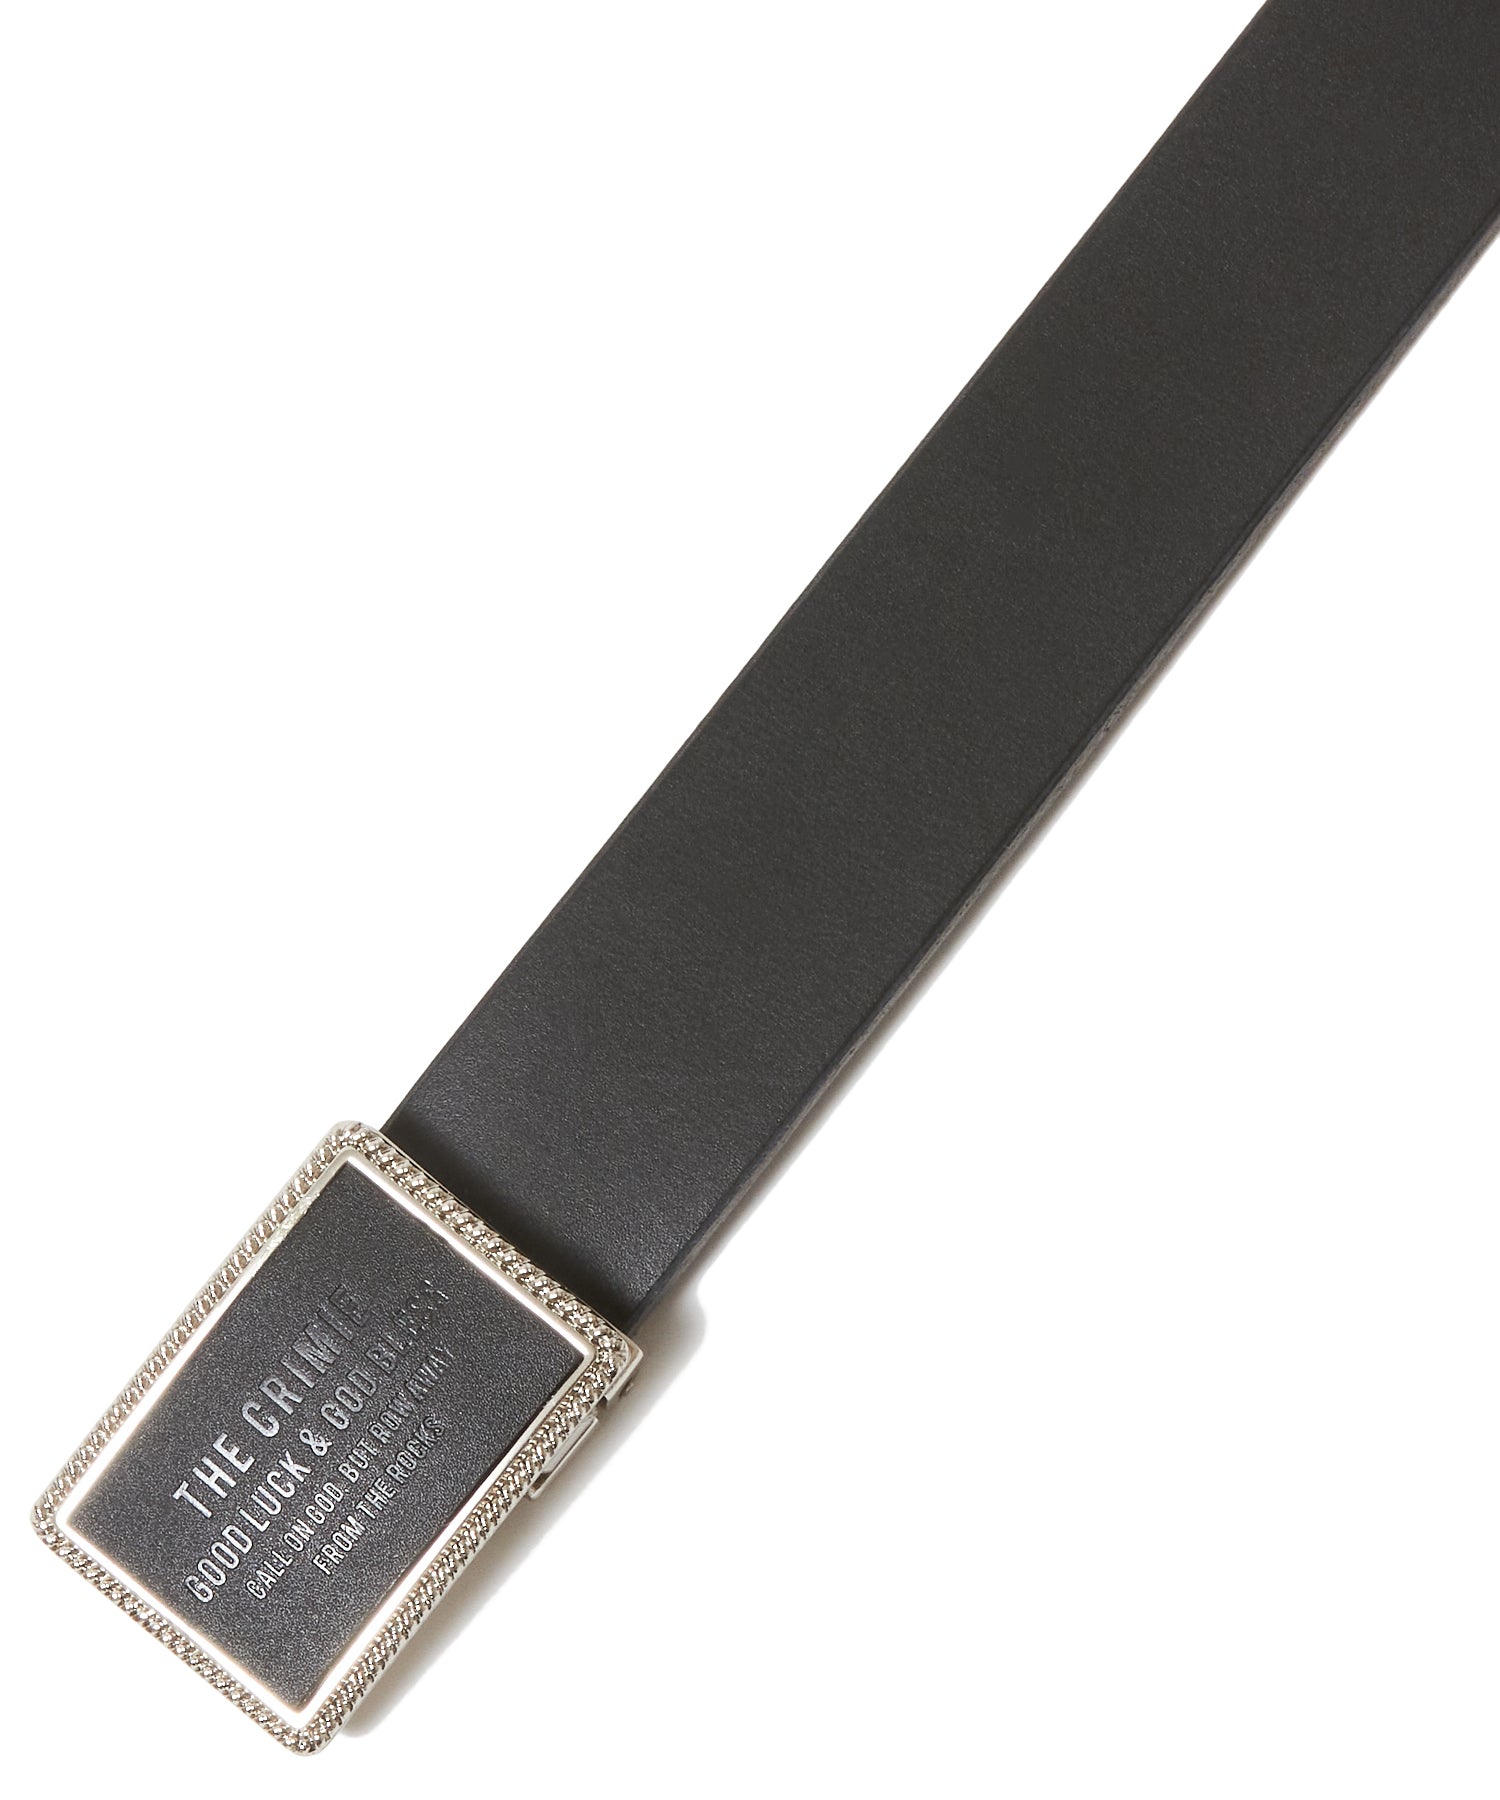 LEATHER PLATE BUCKLE BELT